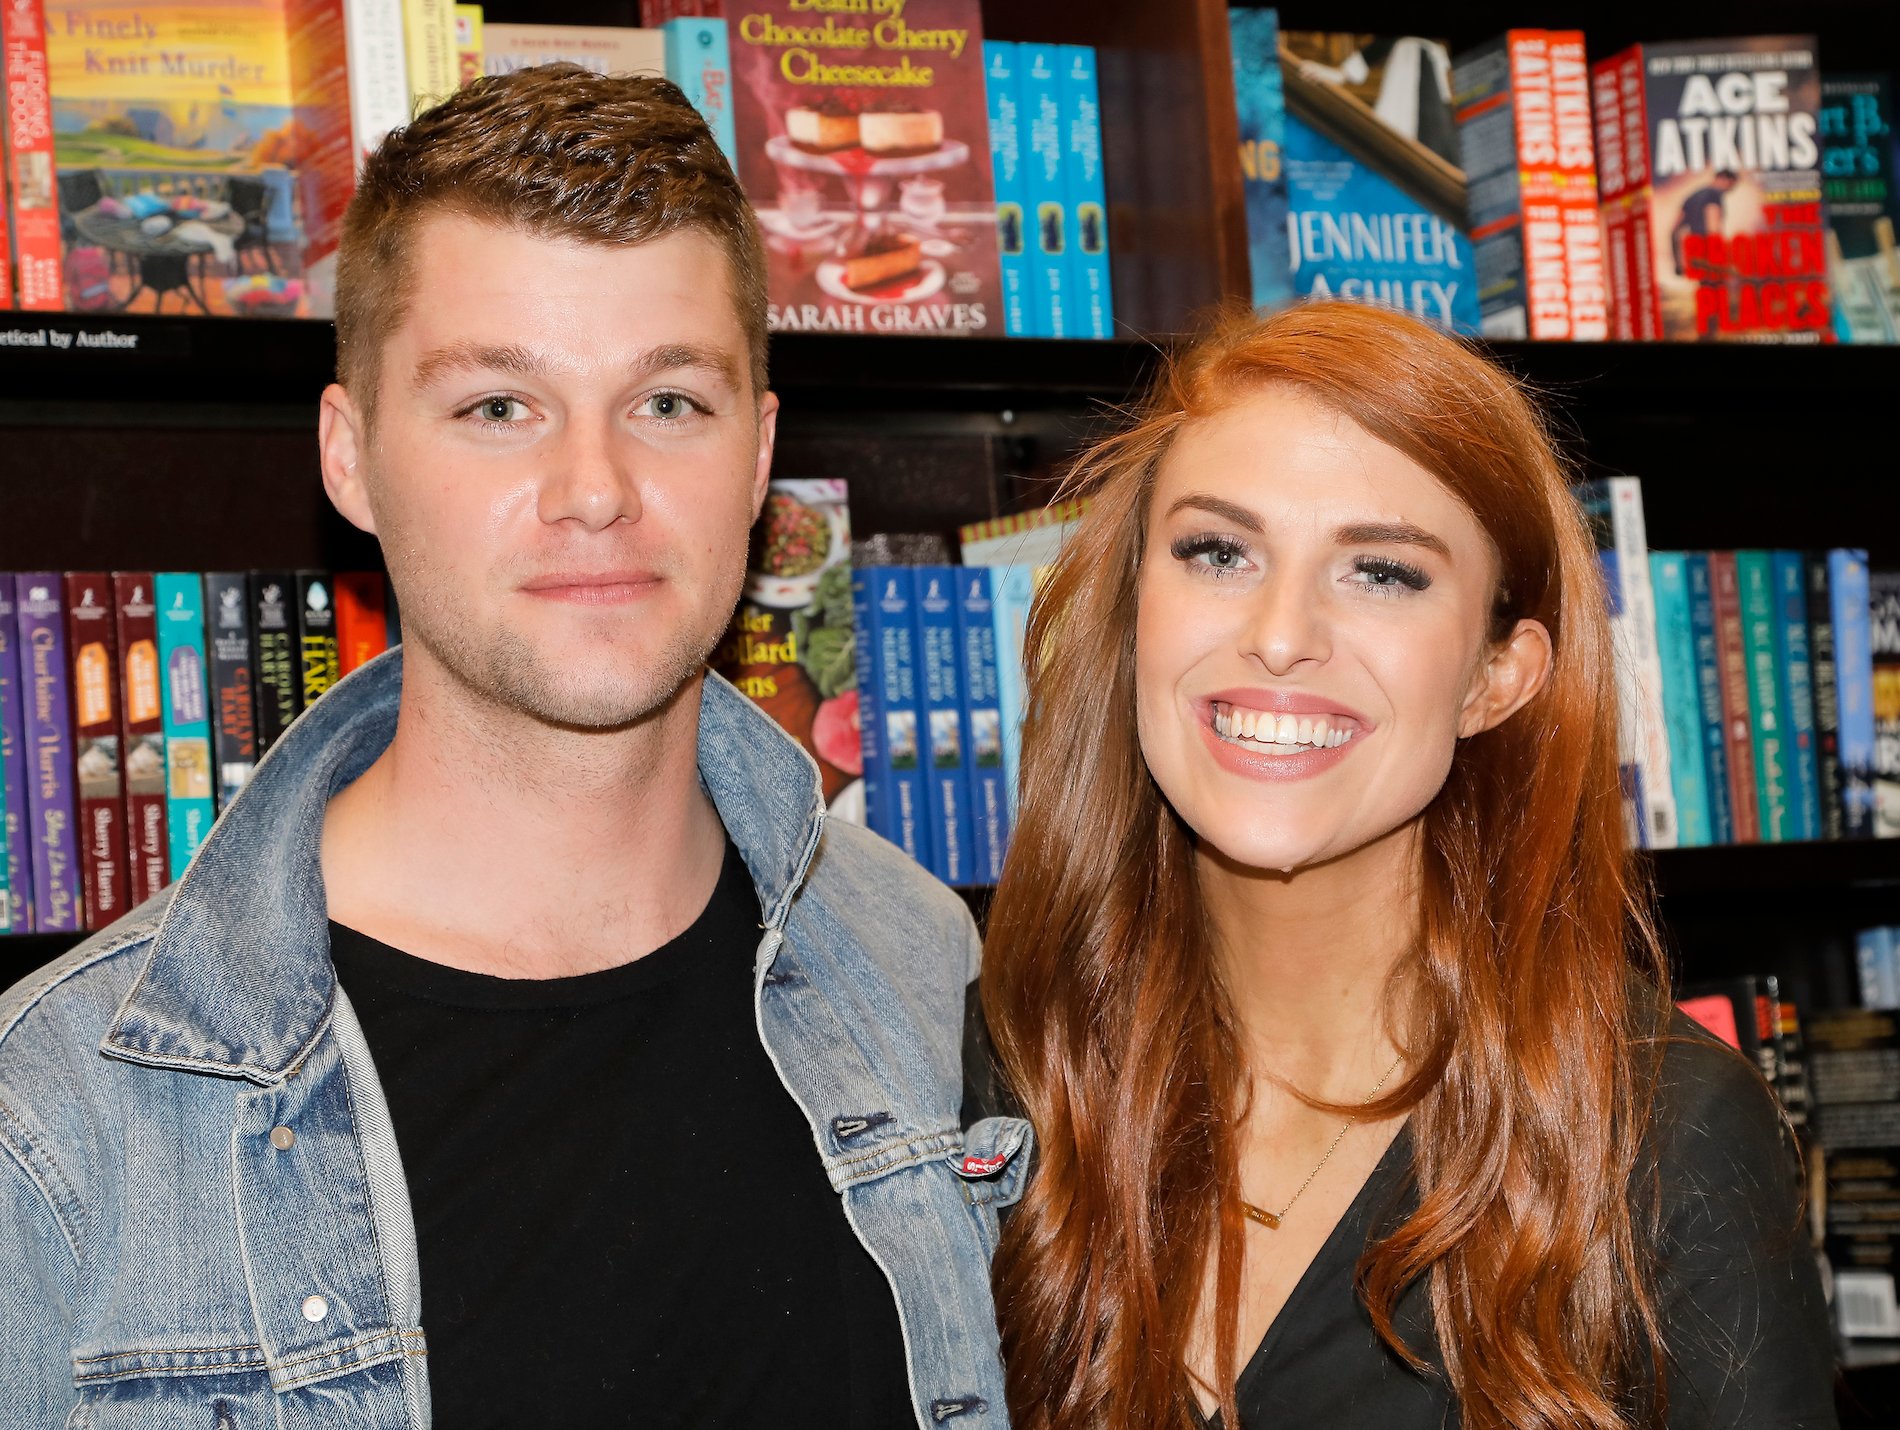 Jeremy Roloff and Audrey Roloff from 'Little People, Big World' smiling together